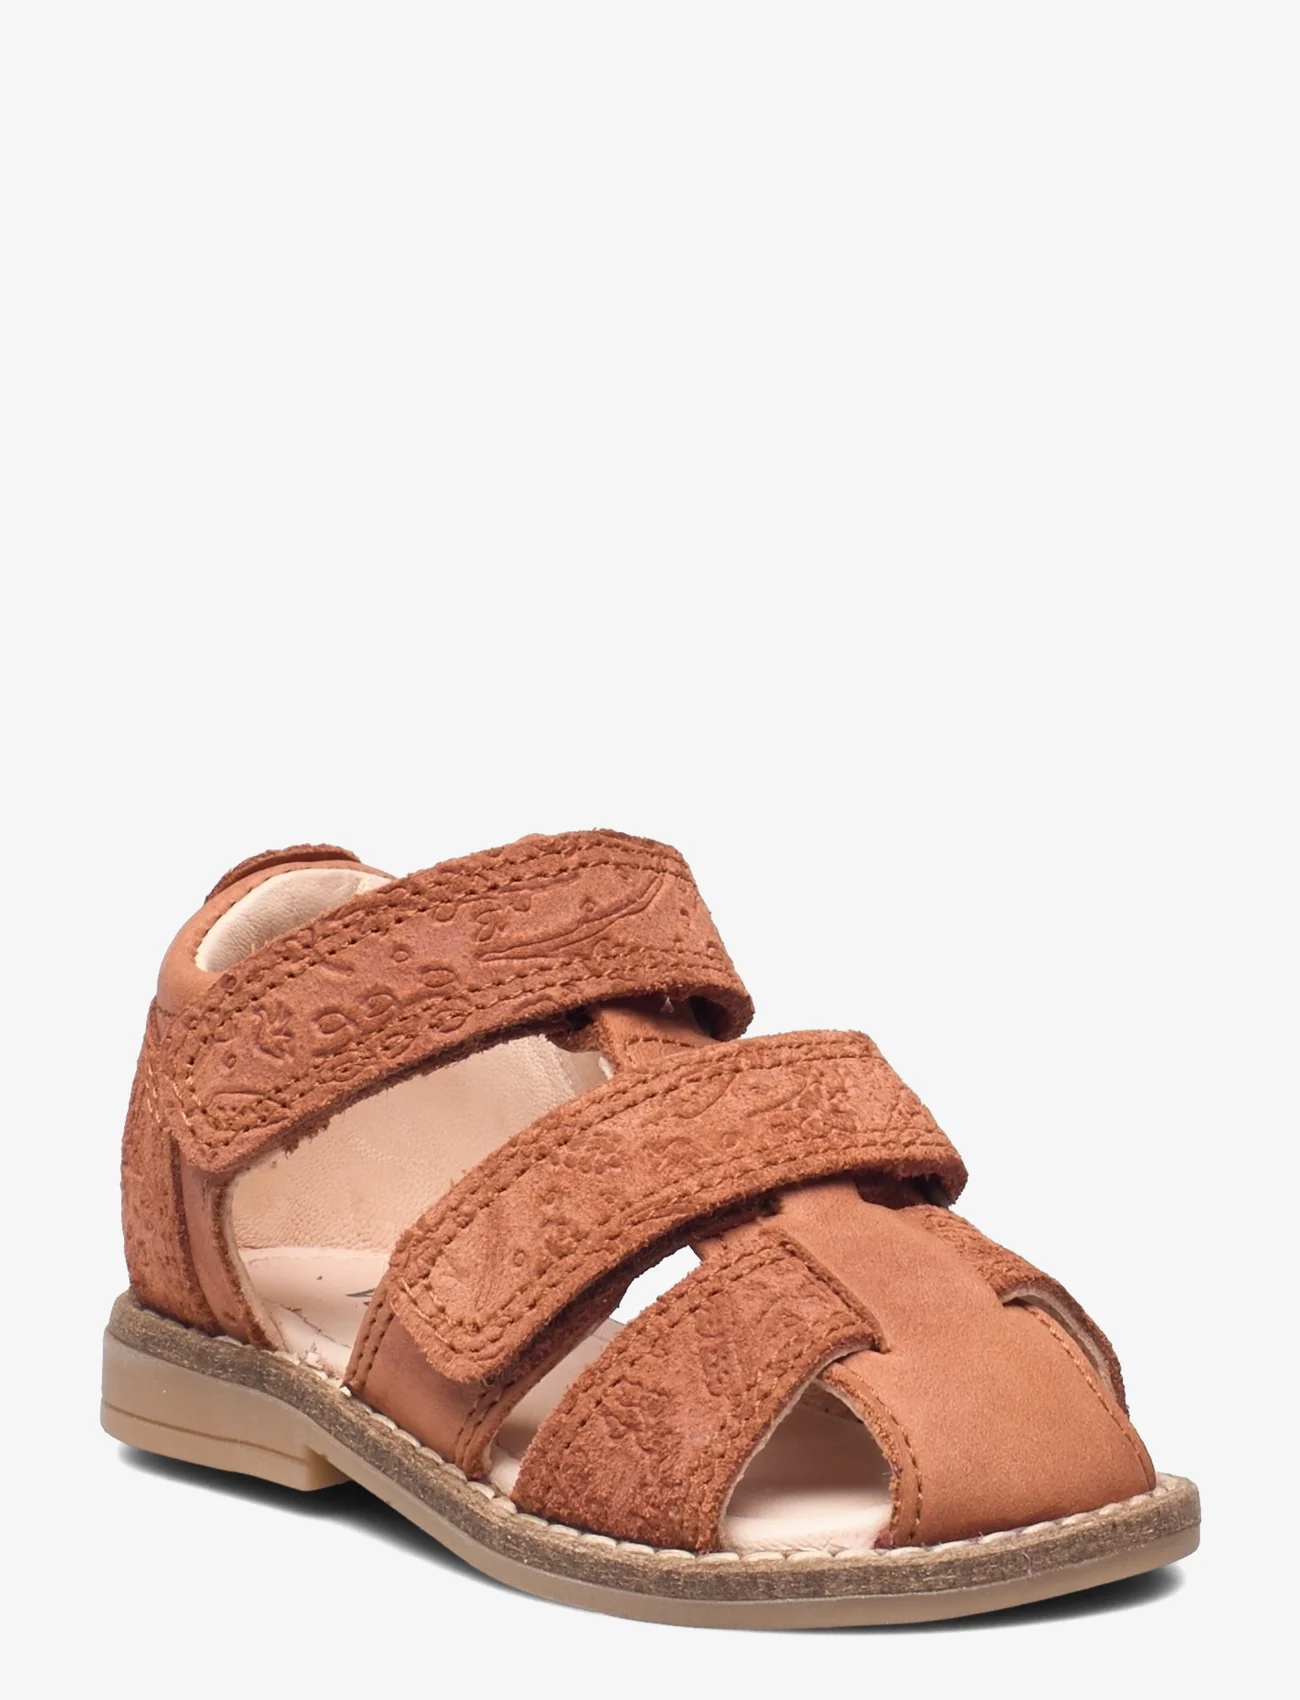 Wheat - Macey closed toe - sommarfynd - amber brown - 0